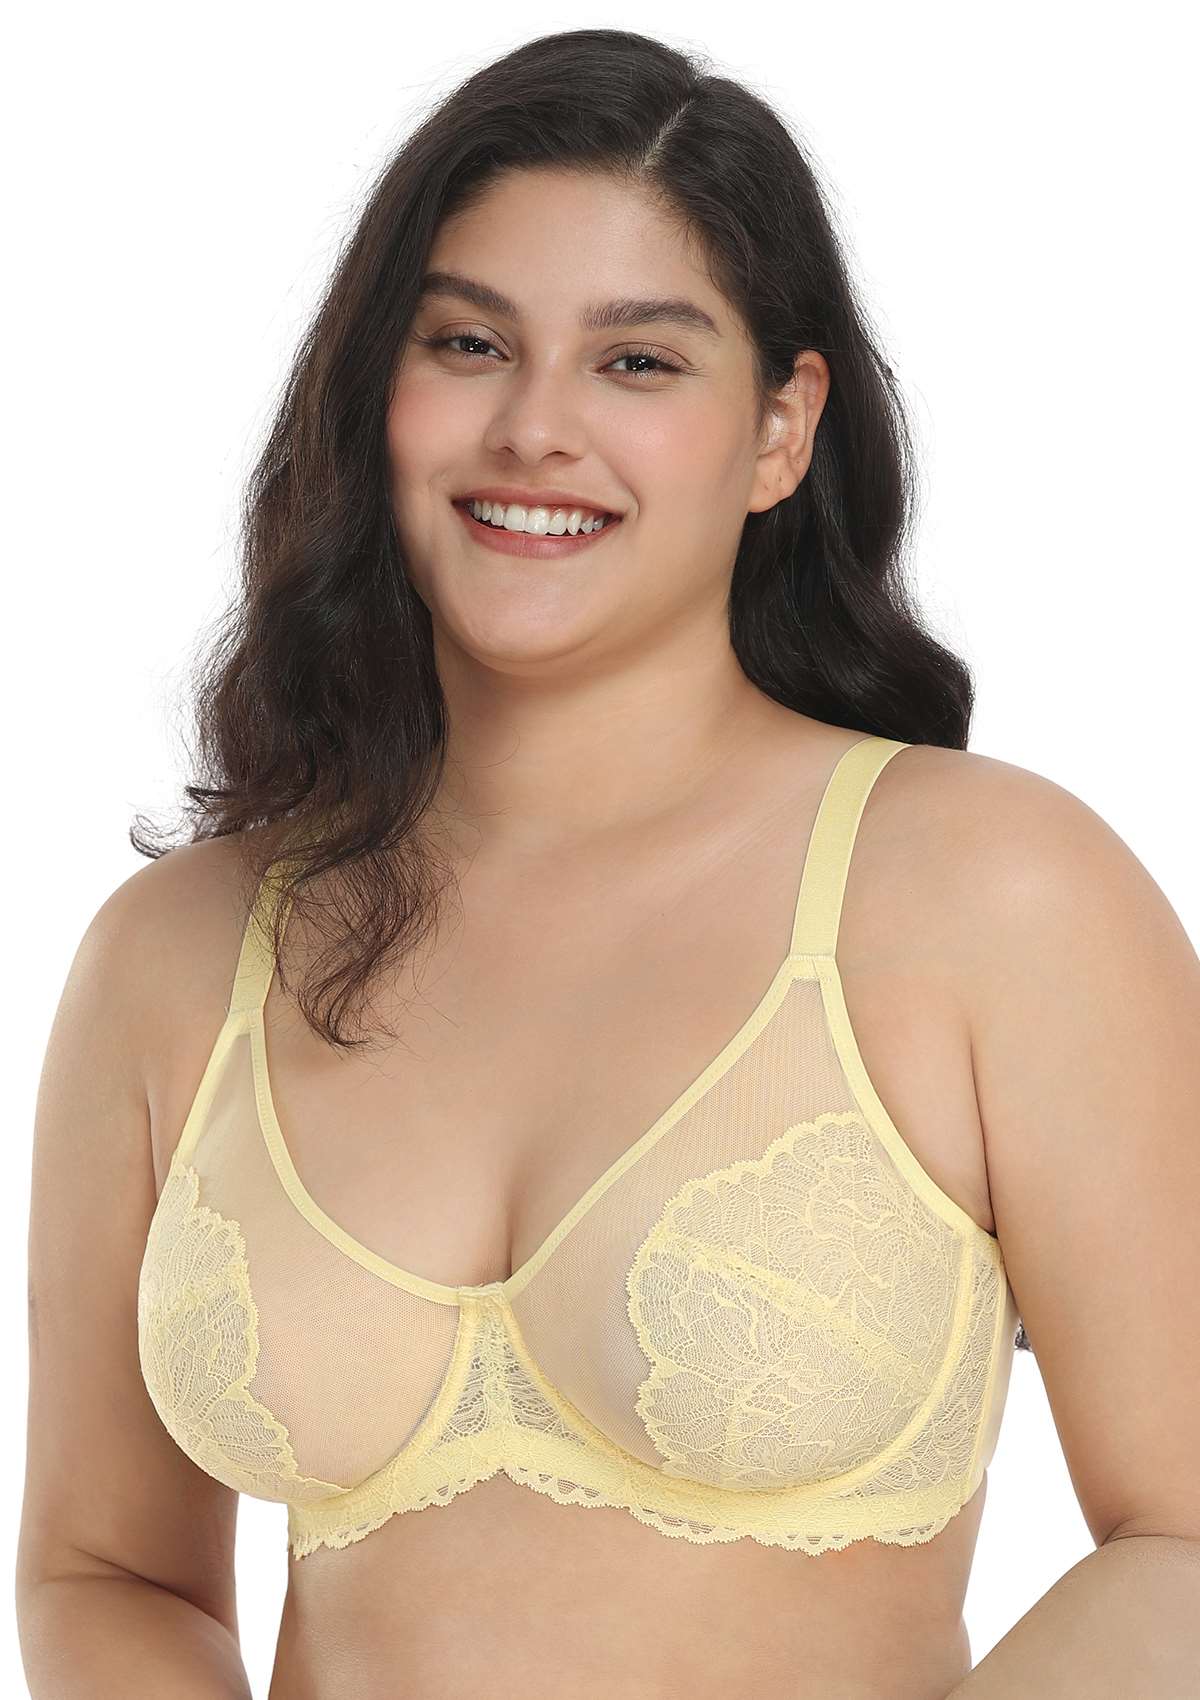 HSIA Blossom Full Coverage Side Support Bra: Designed For Heavy Busts - Light Yellow / 34 / D